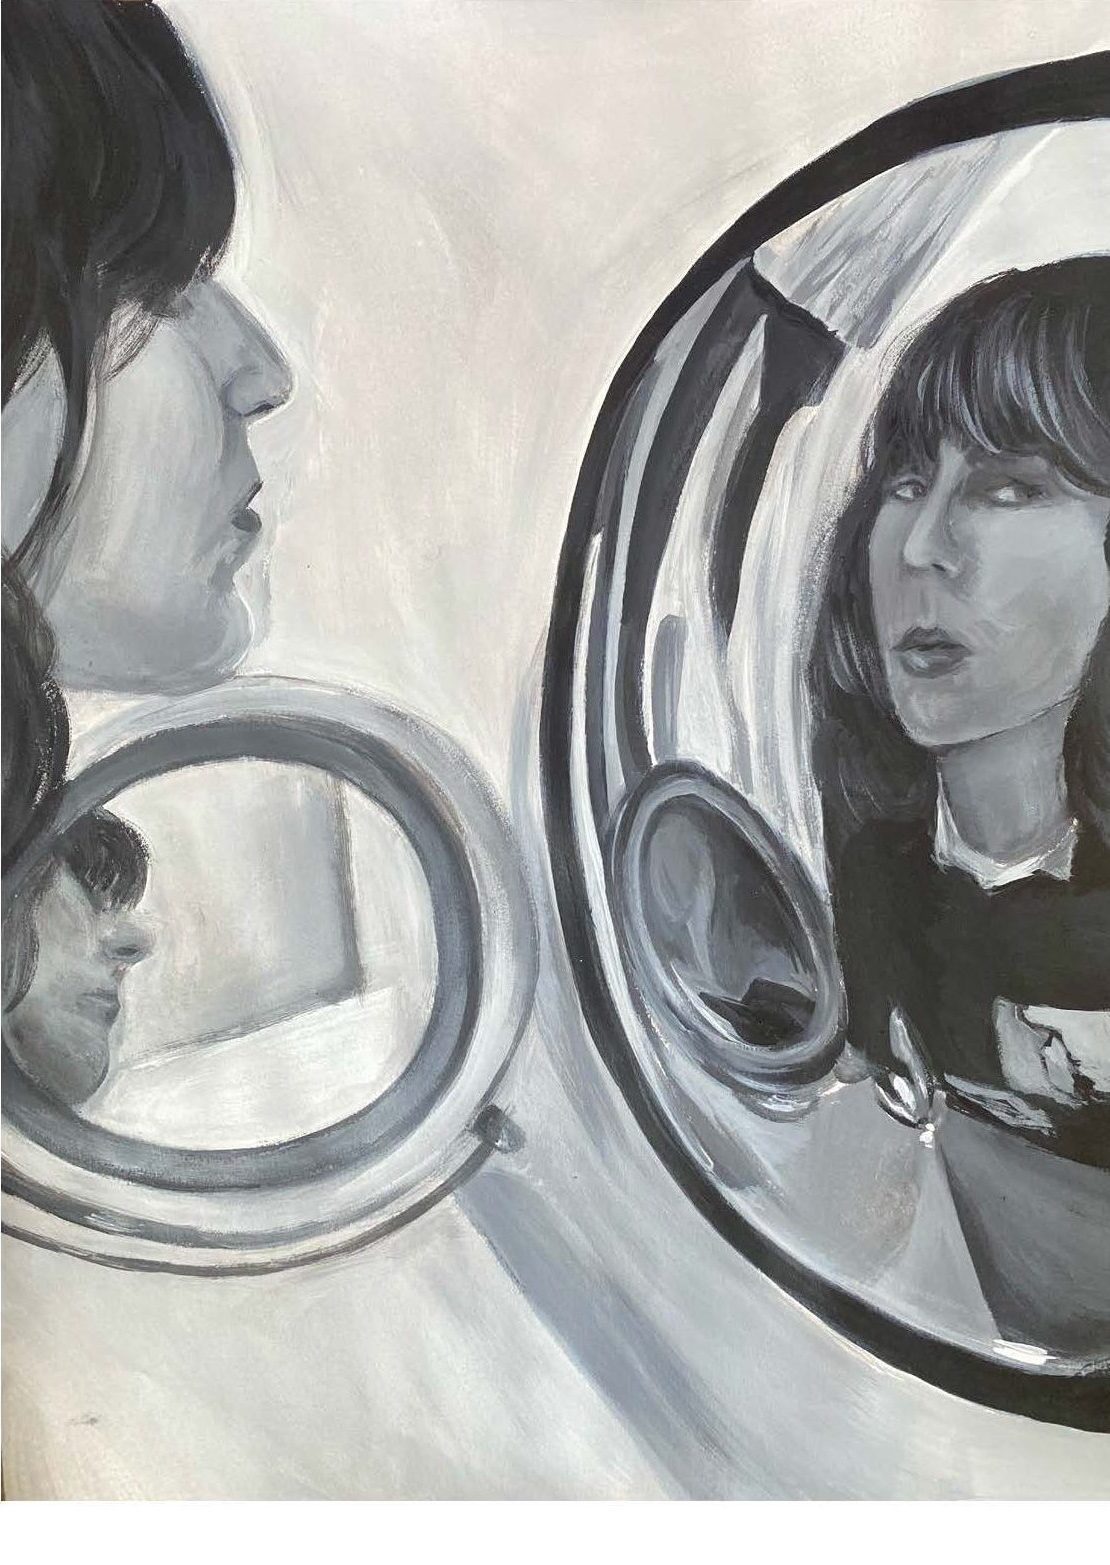 Painting in greys and blacks of a young person looking at their reflection